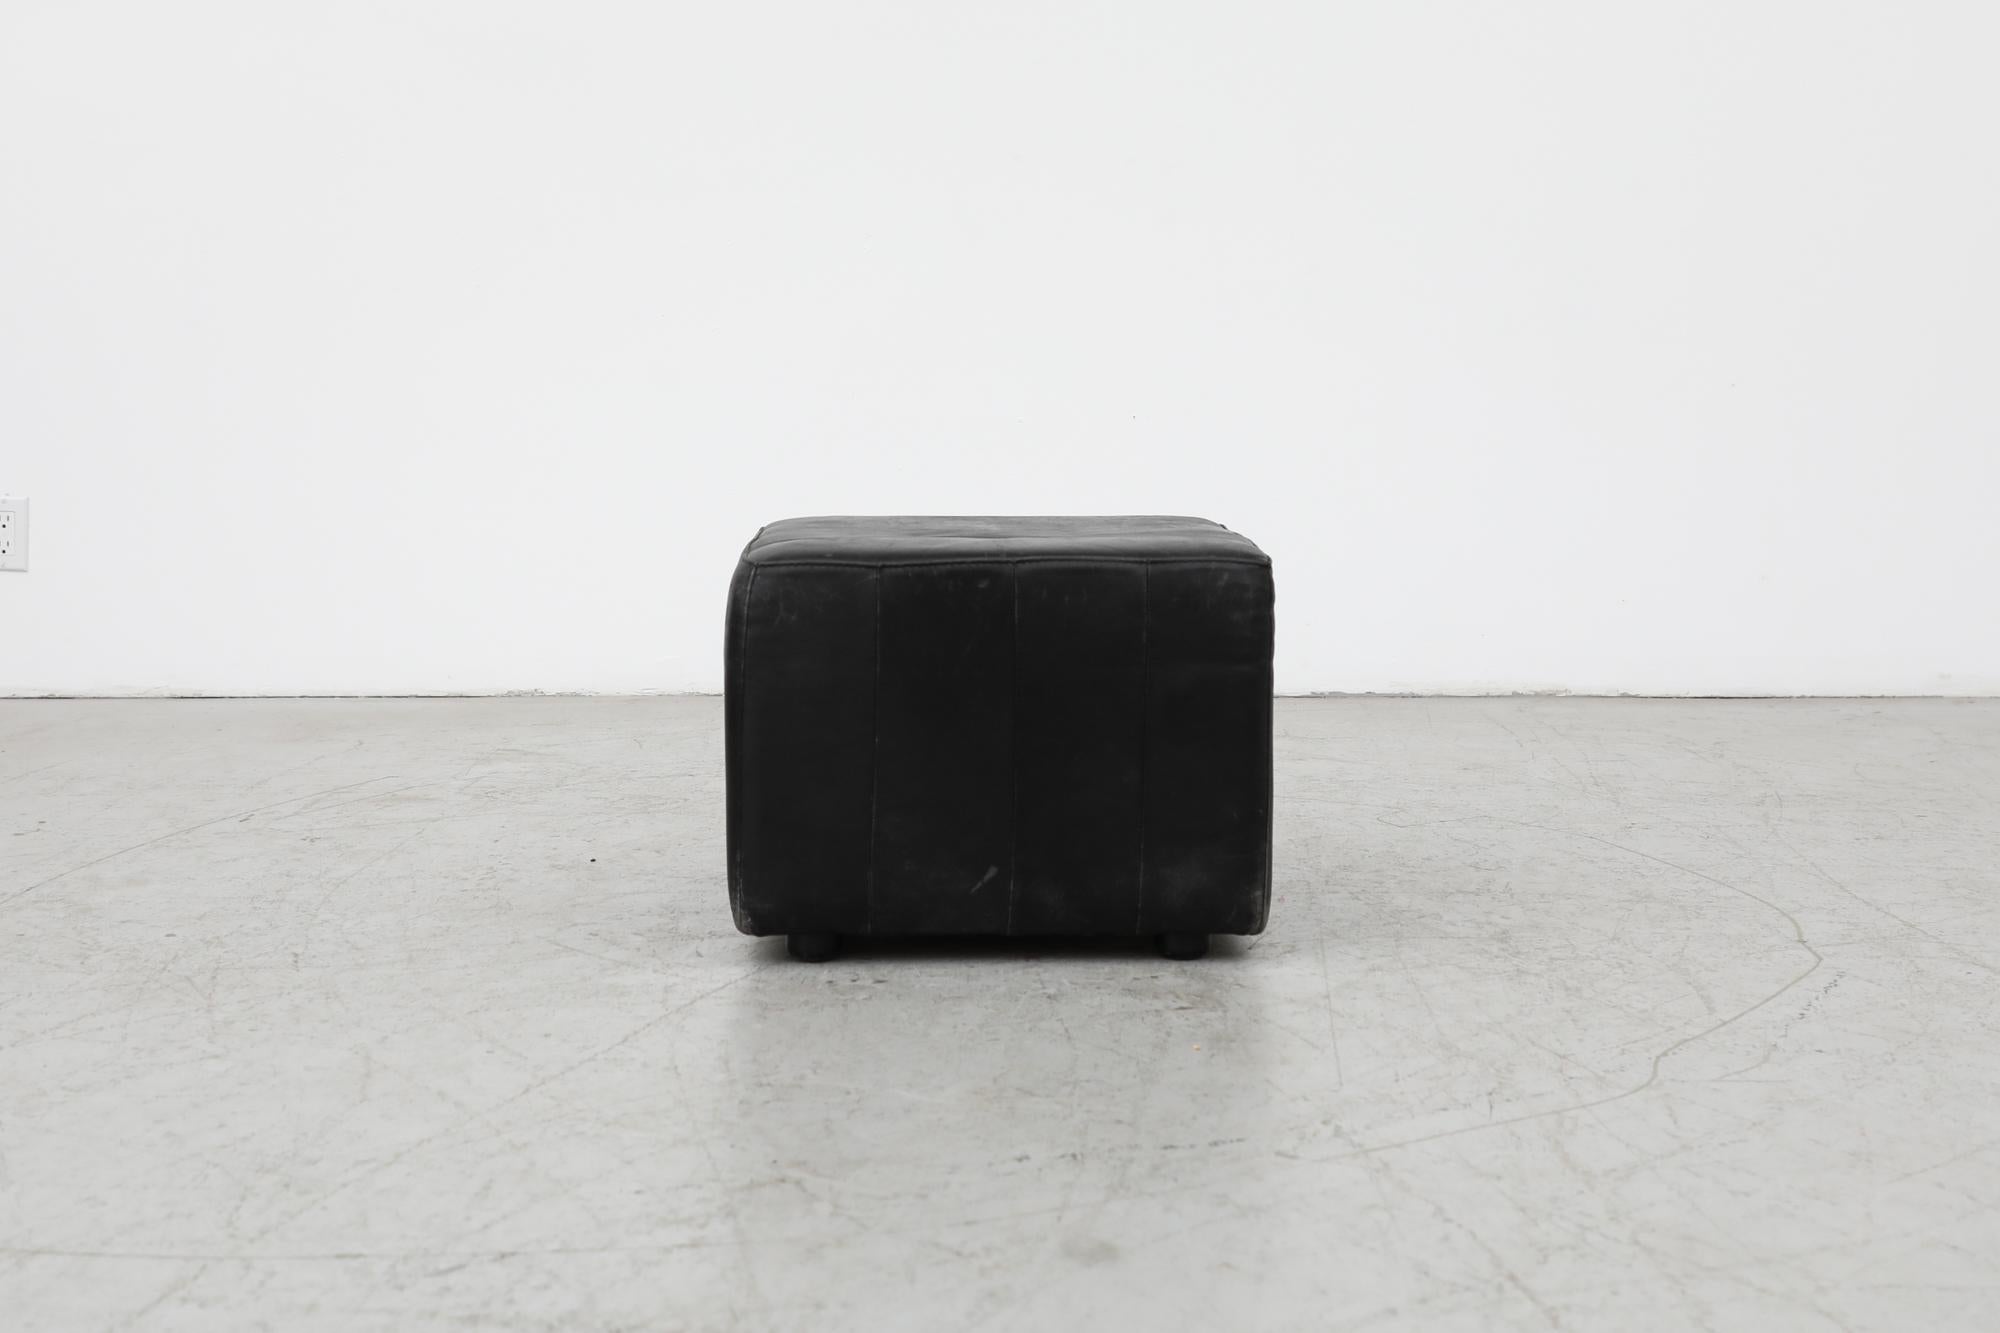 Mid-Century De Sede style black leather cube ottoman. In original condition with visible wear, including scratching, consistent with its age and use.